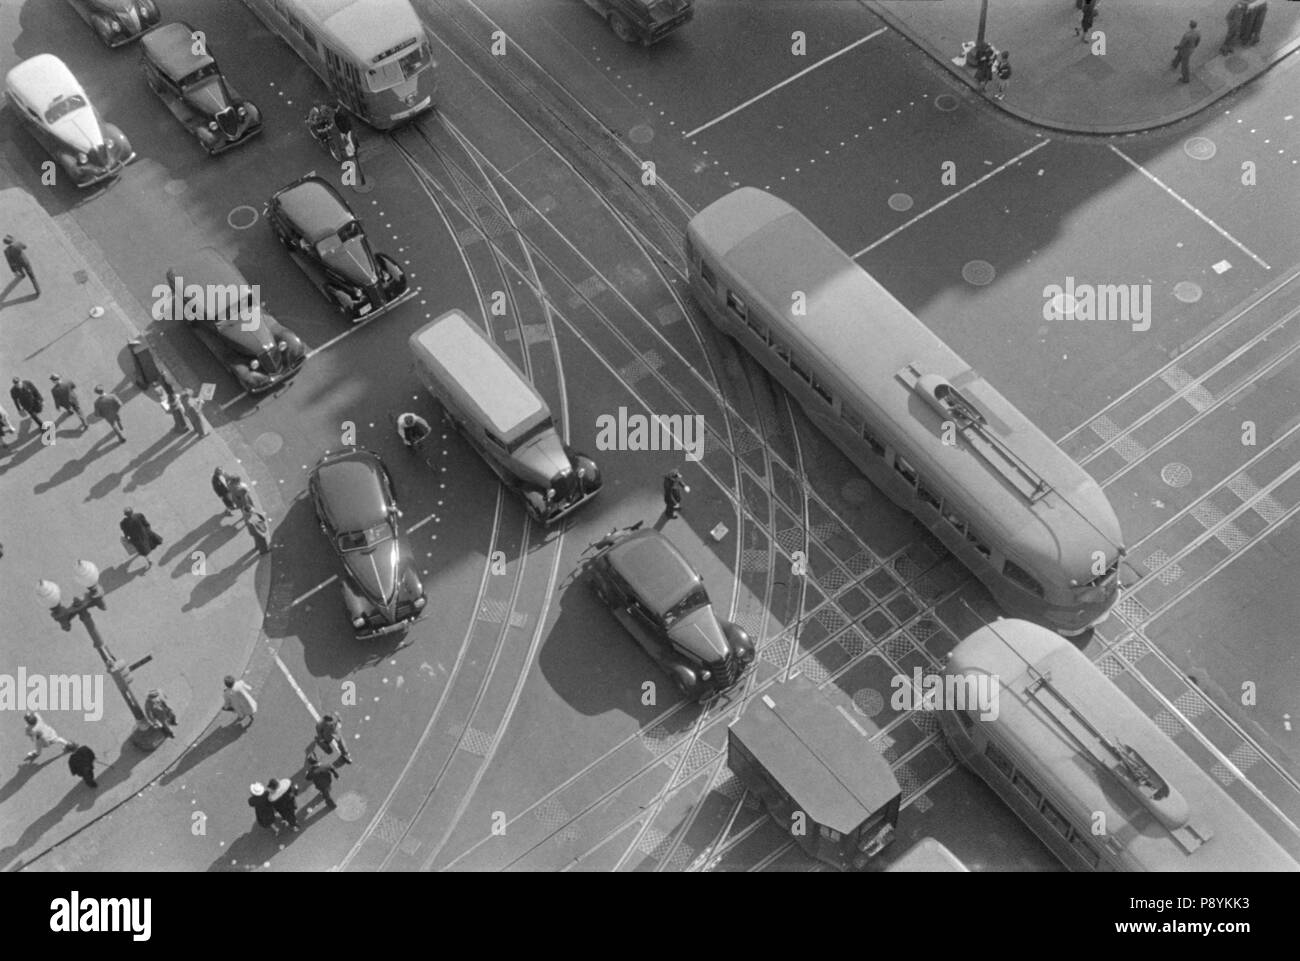 High Angle View of Street Scene with Pedestrians, Street Cars and Automobiles, 14th Street and Pennsylvania Avenue, Washington DC, USA, David Myers,  Farm Security Administration, 1939 Stock Photo